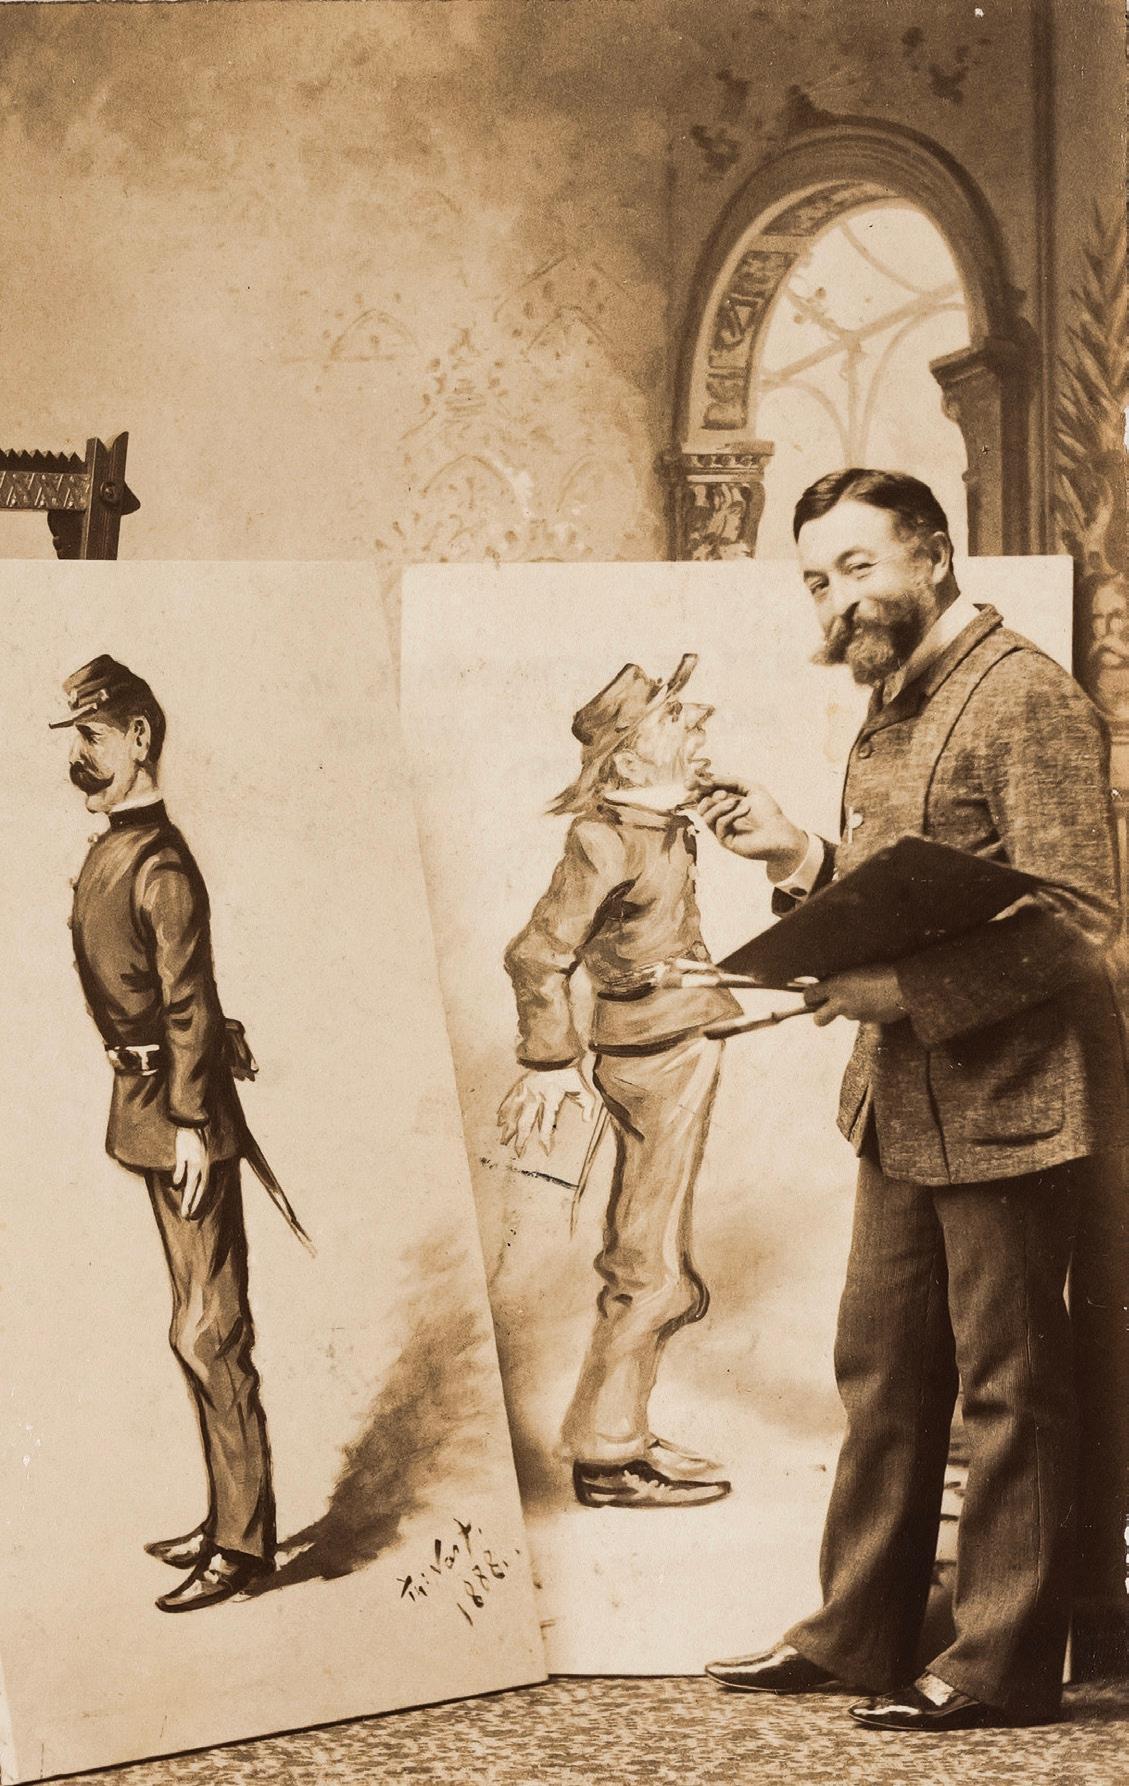 A photograph of Thomas Nast drawing two caricatures, circa 1888. Gift of Thomas Nast Jr., Mabel Nast Crawford, and Cyril Nast; The Metropolitan Museum of Art, New York. (Public Domain)